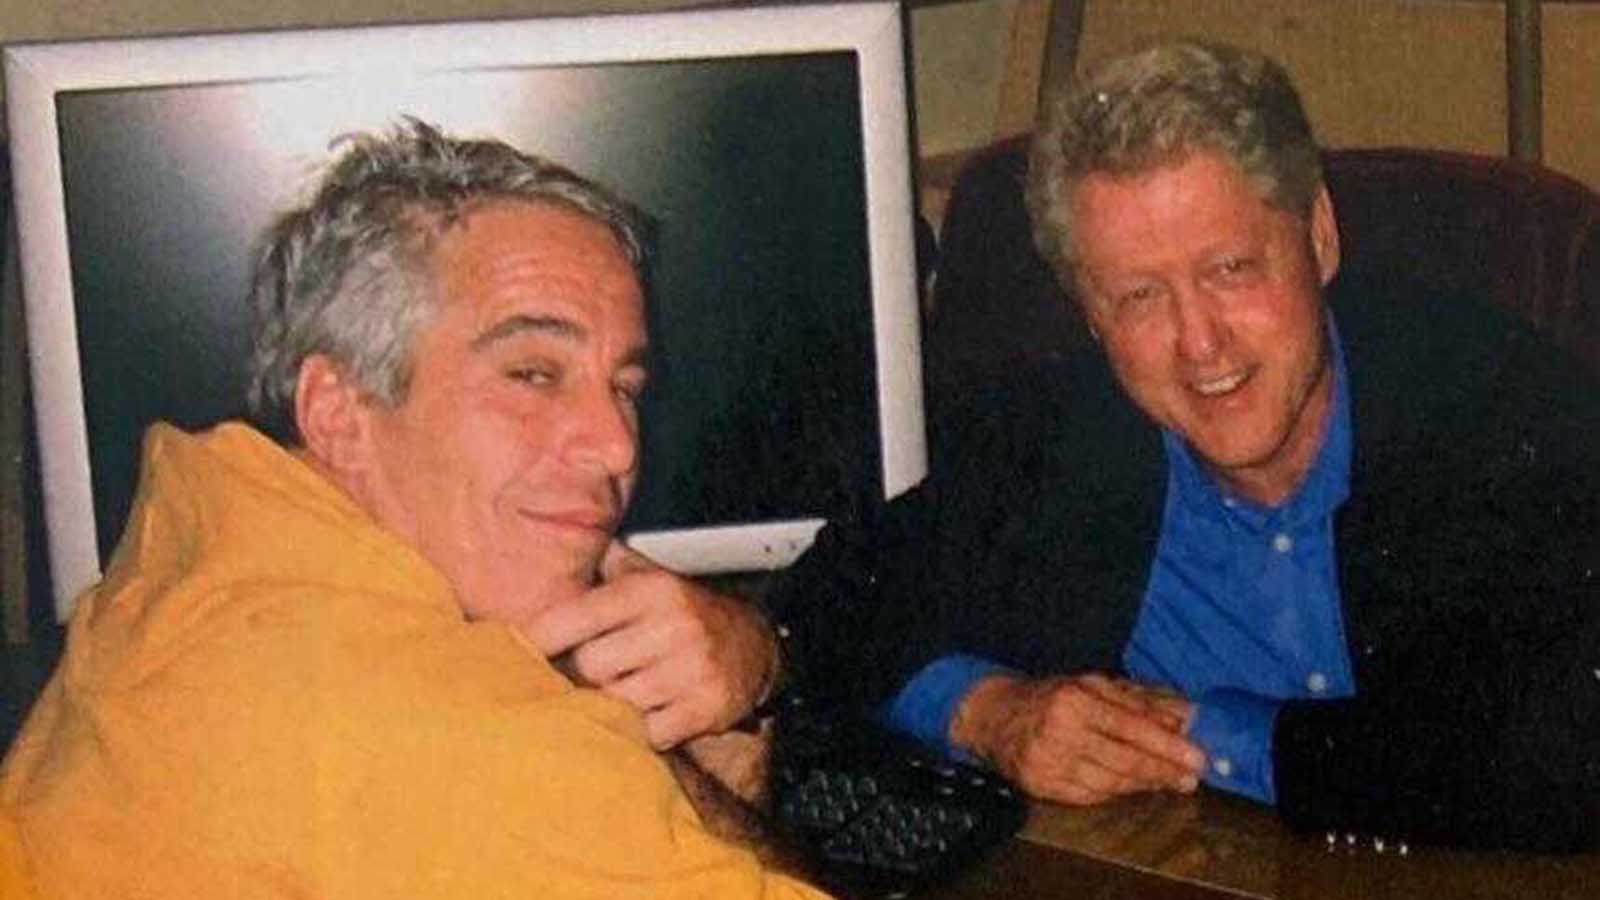 With documents coming out thanks to the Ghislaine Maxwell case, many are wondering if the famous friends of Jeffrey Epstein are going down too.